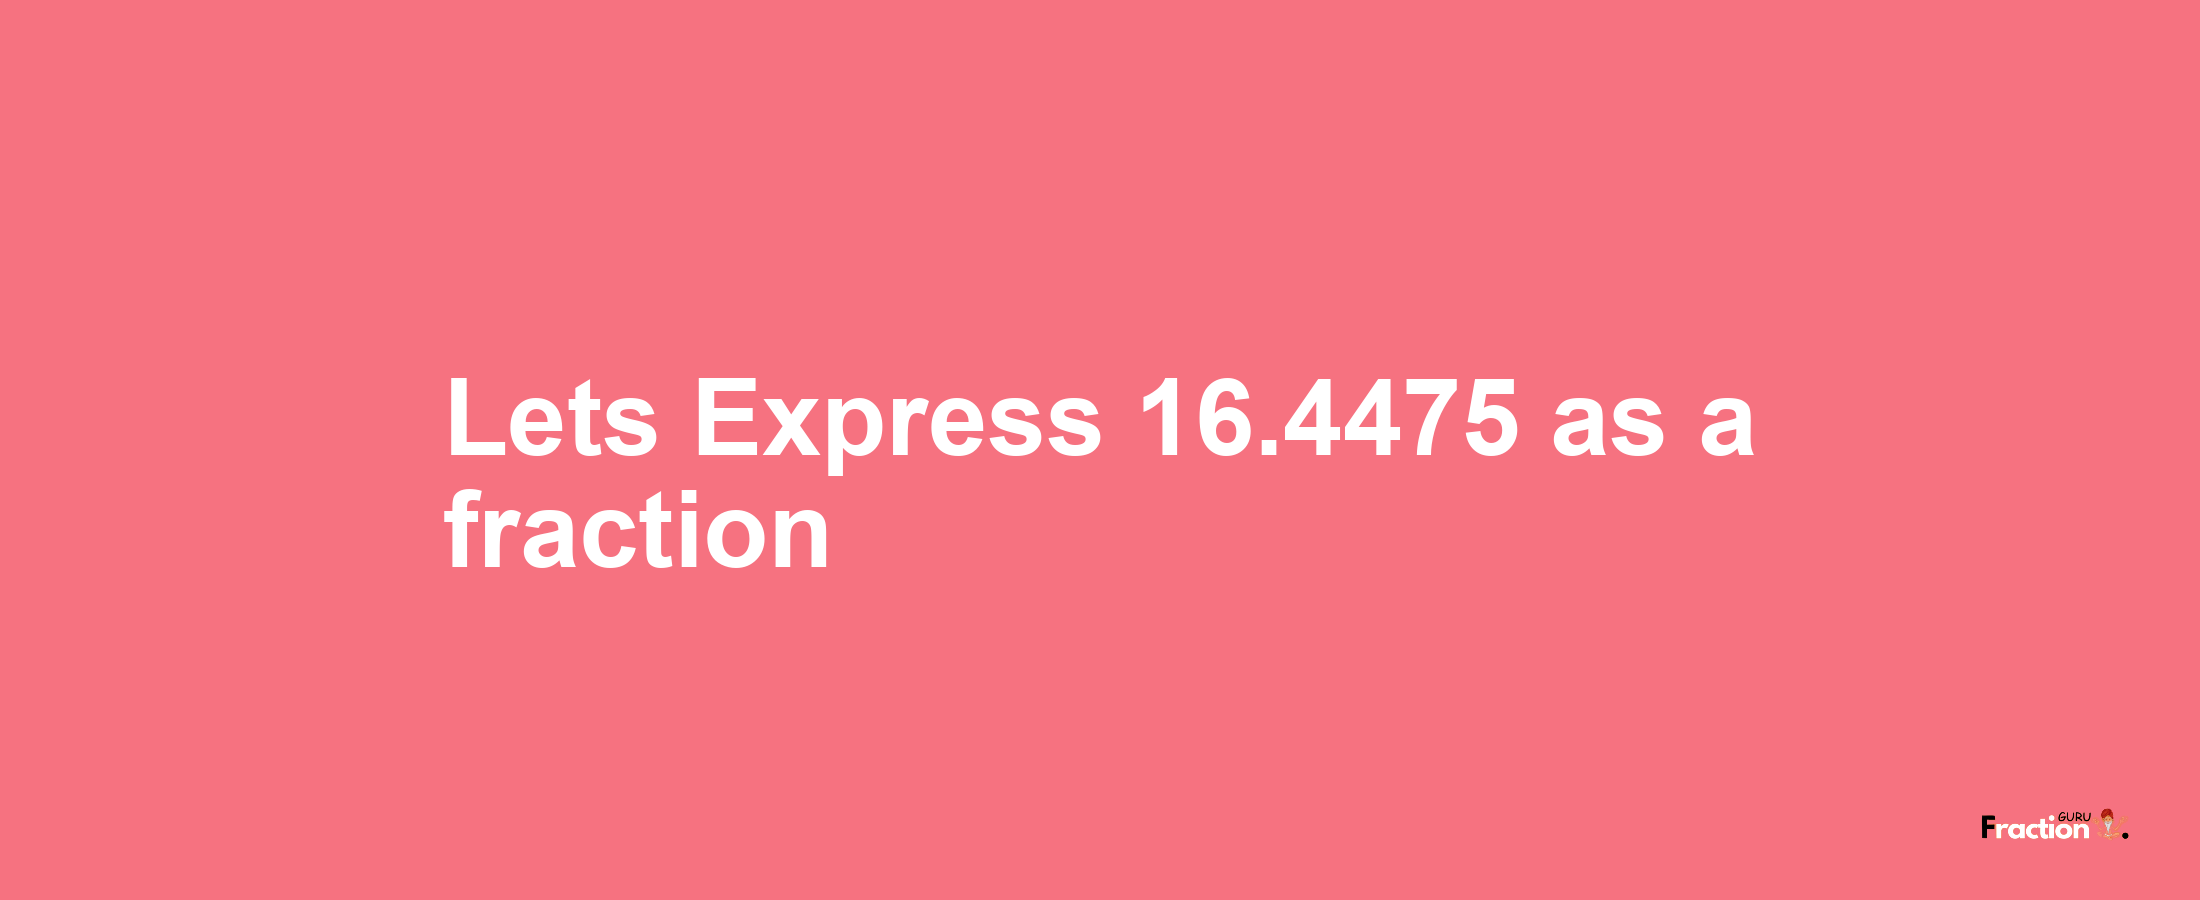 Lets Express 16.4475 as afraction